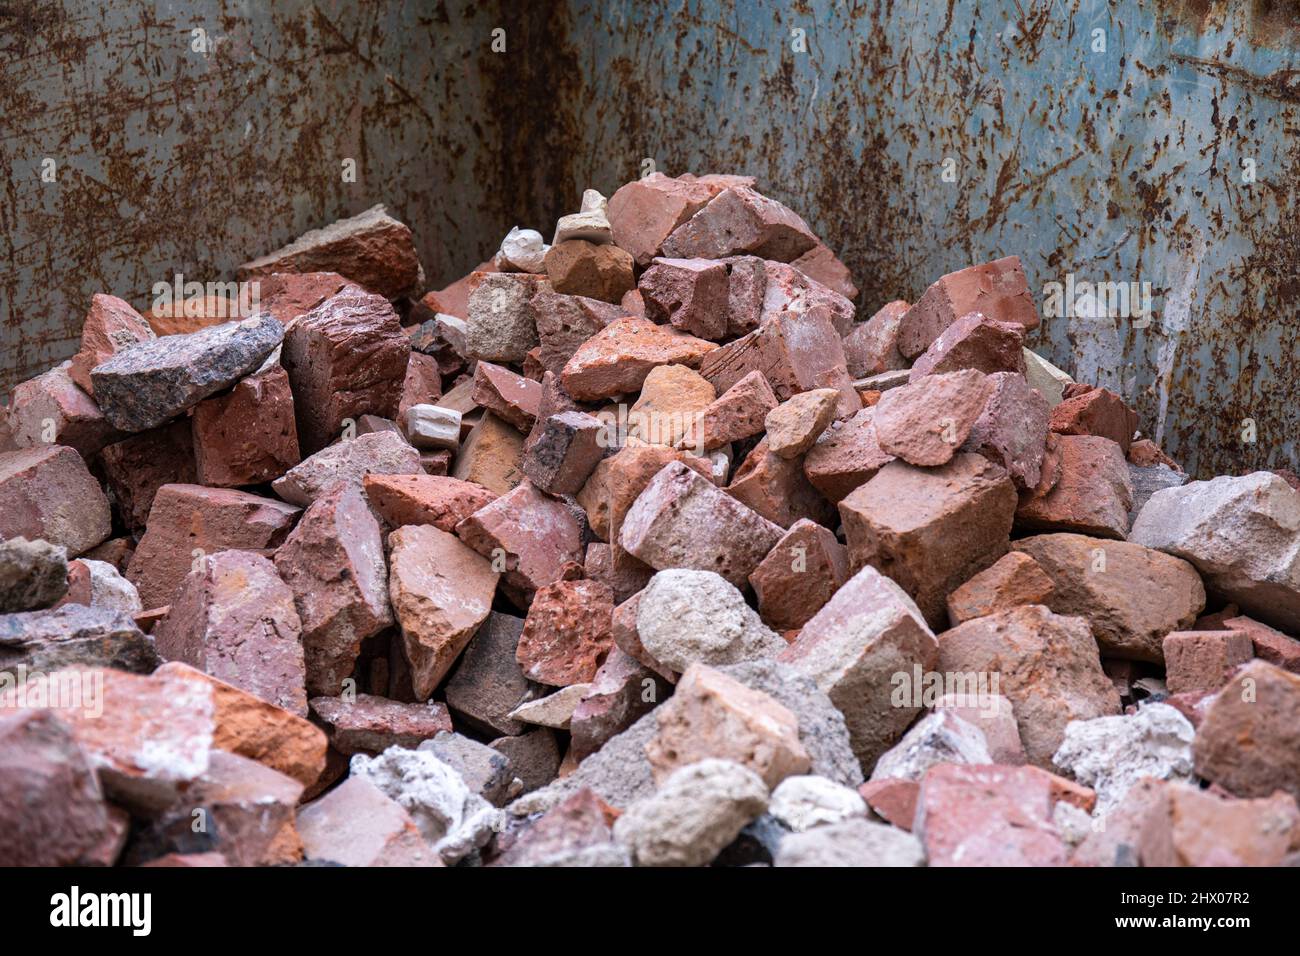 https://c8.alamy.com/comp/2HX07R2/broken-red-bricks-from-demolished-wall-in-construction-waste-container-2HX07R2.jpg